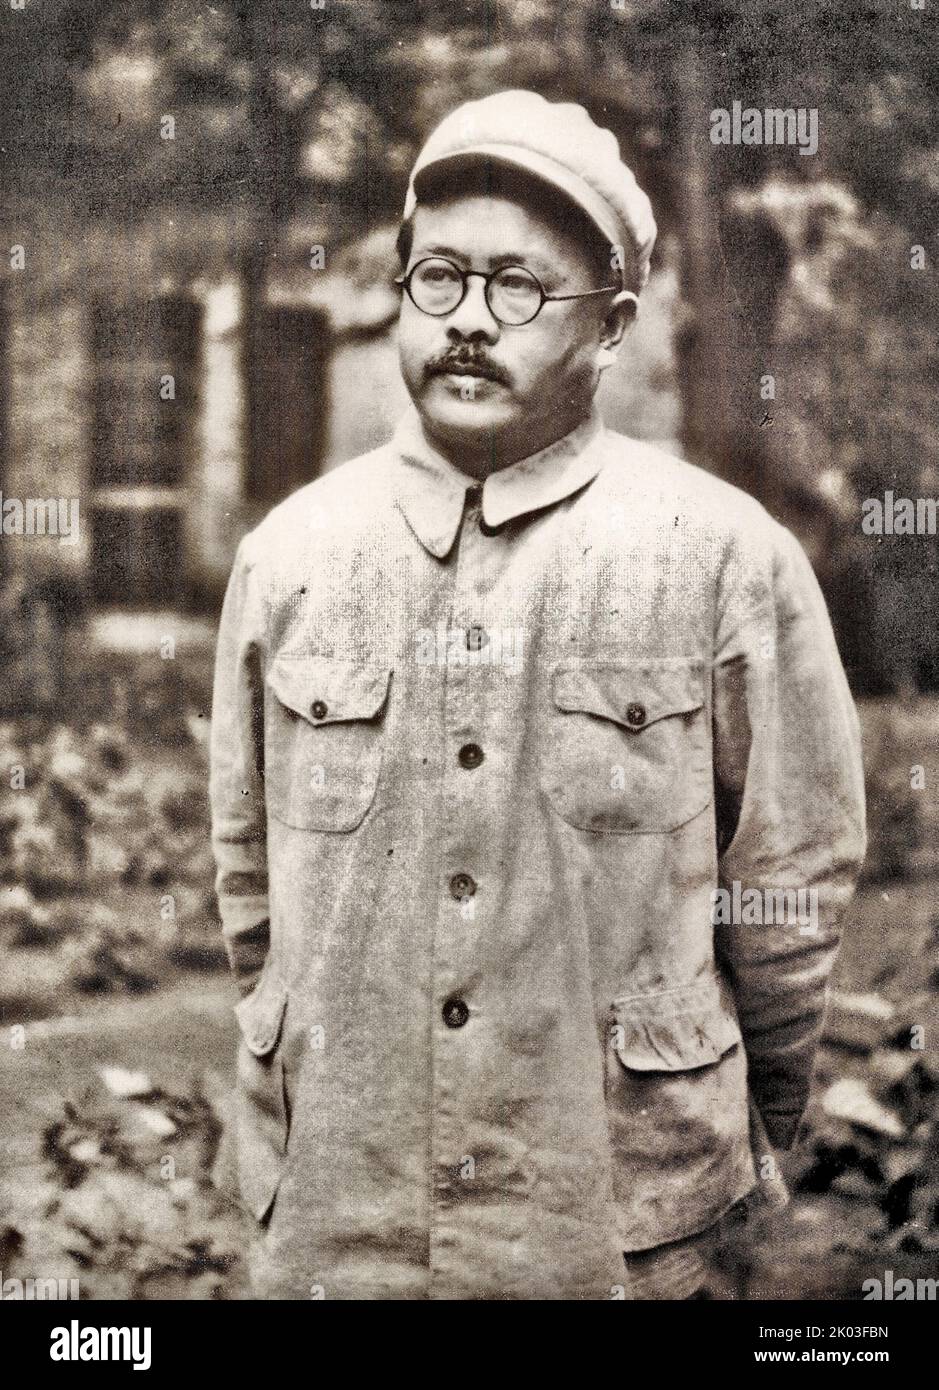 Ren Bishi was a military and political leader in the early Chinese Communist Party. In the early 1930s, Stock Photo